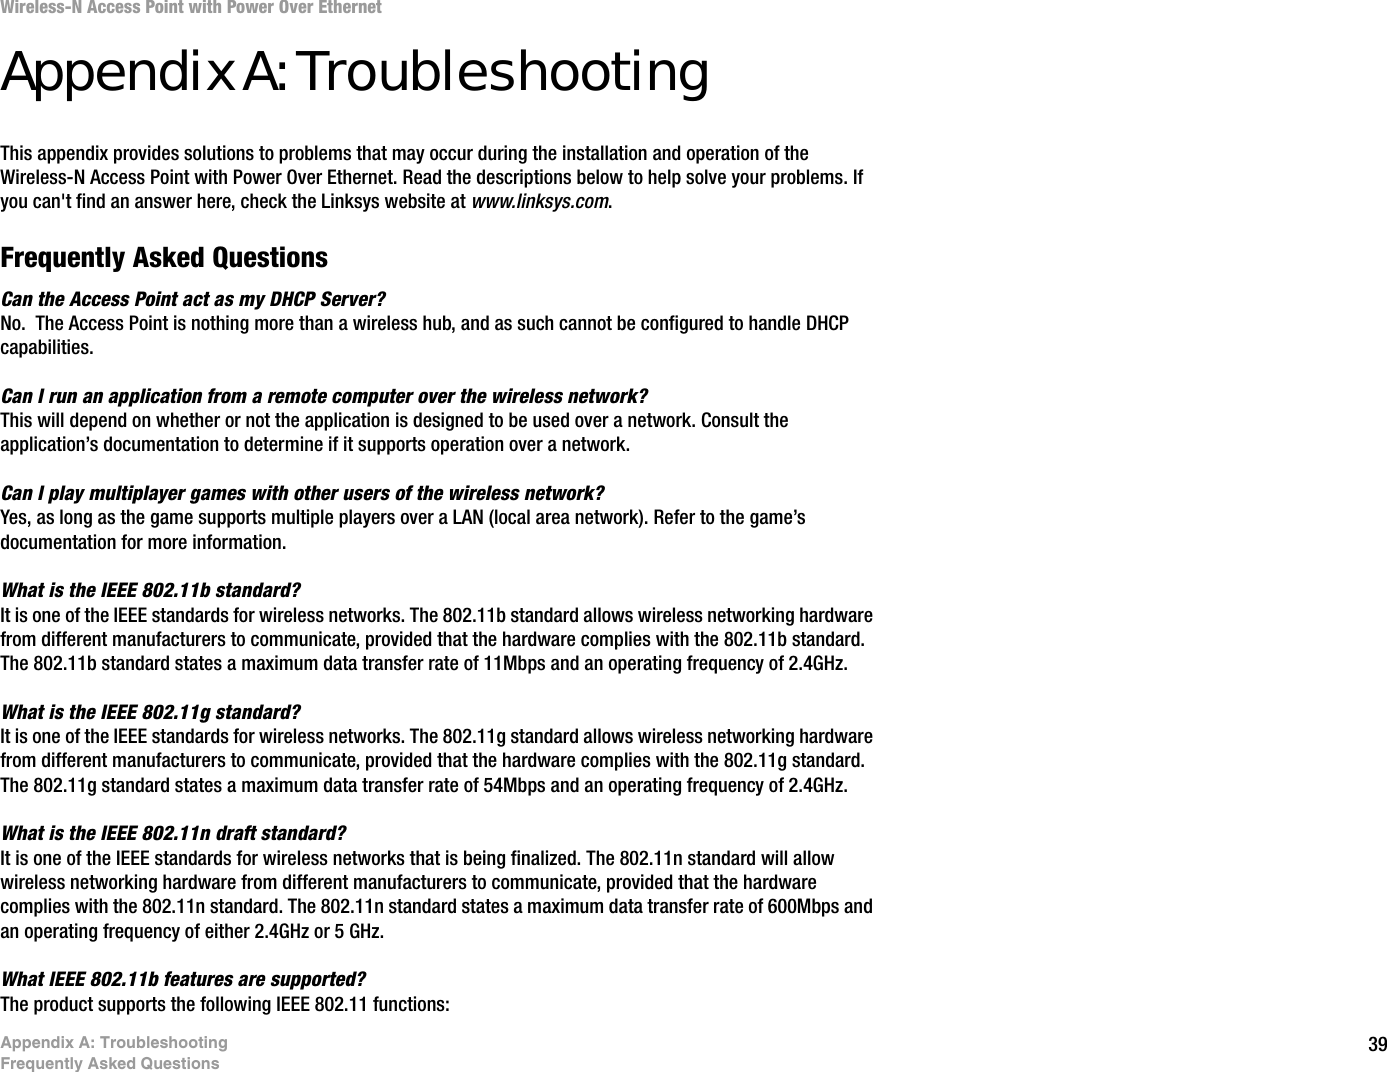 39Appendix A: TroubleshootingFrequently Asked QuestionsWireless-N Access Point with Power Over EthernetAppendix A: TroubleshootingThis appendix provides solutions to problems that may occur during the installation and operation of the Wireless-N Access Point with Power Over Ethernet. Read the descriptions below to help solve your problems. If you can&apos;t find an answer here, check the Linksys website at www.linksys.com.Frequently Asked QuestionsCan the Access Point act as my DHCP Server?No.  The Access Point is nothing more than a wireless hub, and as such cannot be configured to handle DHCP capabilities.Can I run an application from a remote computer over the wireless network?This will depend on whether or not the application is designed to be used over a network. Consult the application’s documentation to determine if it supports operation over a network.Can I play multiplayer games with other users of the wireless network?Yes, as long as the game supports multiple players over a LAN (local area network). Refer to the game’s documentation for more information.What is the IEEE 802.11b standard?It is one of the IEEE standards for wireless networks. The 802.11b standard allows wireless networking hardware from different manufacturers to communicate, provided that the hardware complies with the 802.11b standard. The 802.11b standard states a maximum data transfer rate of 11Mbps and an operating frequency of 2.4GHz.What is the IEEE 802.11g standard?It is one of the IEEE standards for wireless networks. The 802.11g standard allows wireless networking hardware from different manufacturers to communicate, provided that the hardware complies with the 802.11g standard. The 802.11g standard states a maximum data transfer rate of 54Mbps and an operating frequency of 2.4GHz.What is the IEEE 802.11n draft standard?It is one of the IEEE standards for wireless networks that is being finalized. The 802.11n standard will allow wireless networking hardware from different manufacturers to communicate, provided that the hardware complies with the 802.11n standard. The 802.11n standard states a maximum data transfer rate of 600Mbps and an operating frequency of either 2.4GHz or 5 GHz. What IEEE 802.11b features are supported?The product supports the following IEEE 802.11 functions: 